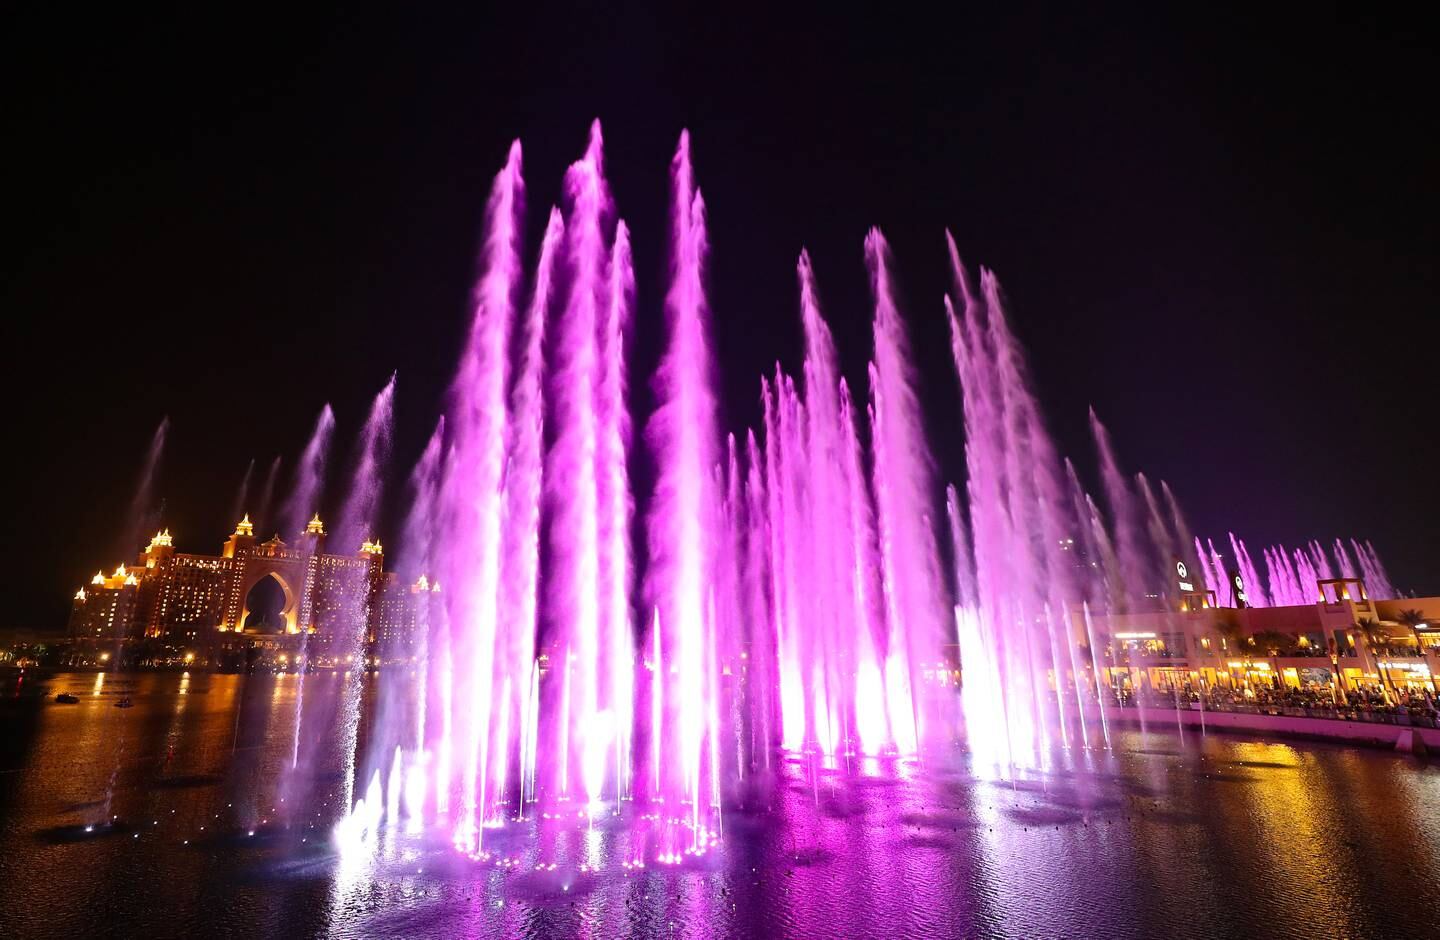 Dubai, United Arab Emirates - Reporter: Sophie Prideaux. Lifestyle. The Palm Fountain Launch. The record for the worlds largest fountain. Thursday, October 22nd, 2020. Dubai. Chris Whiteoak / The National